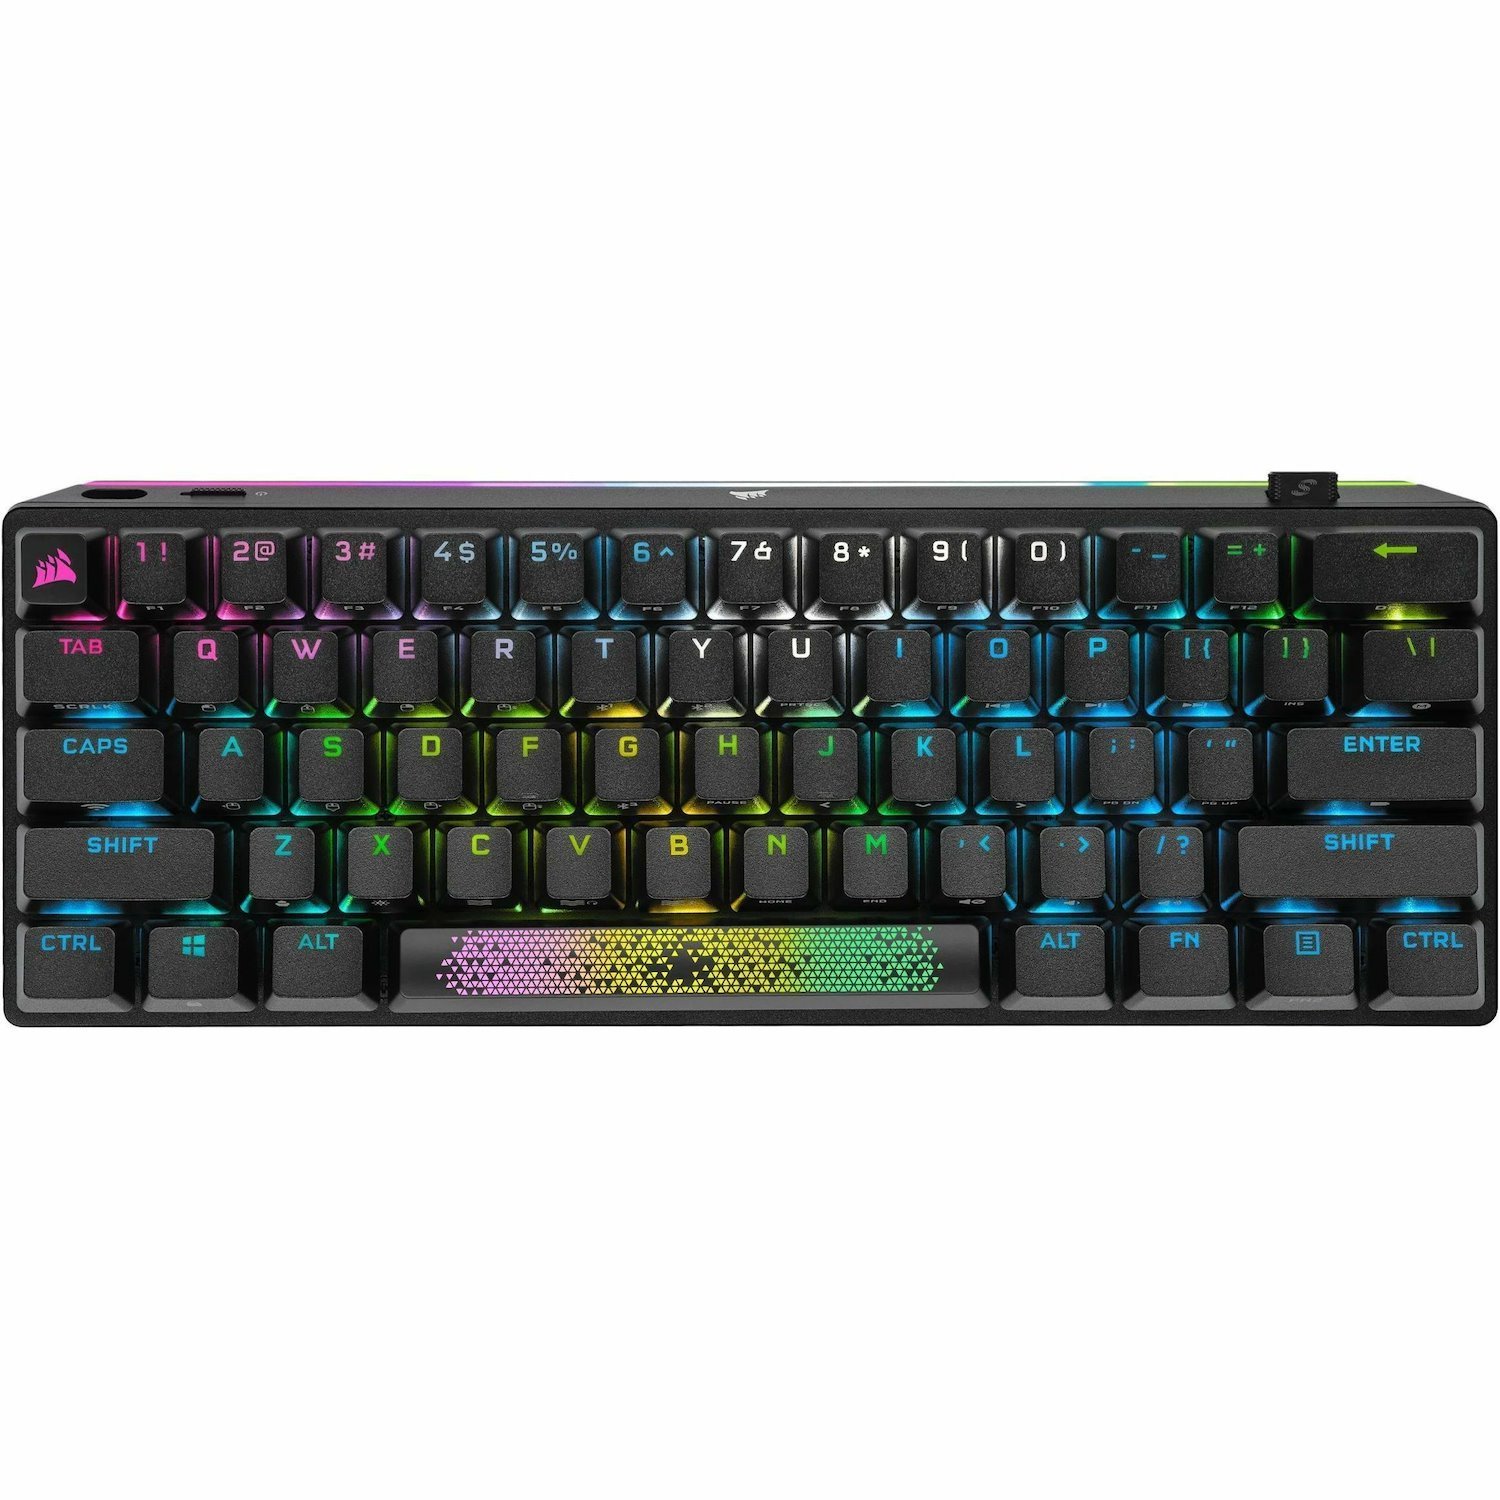 Corsair ProMini K70 Rugged Gaming Keyboard - Wired/Wireless Connectivity - USB 3.0 Type A Interface - RGB LED - Black